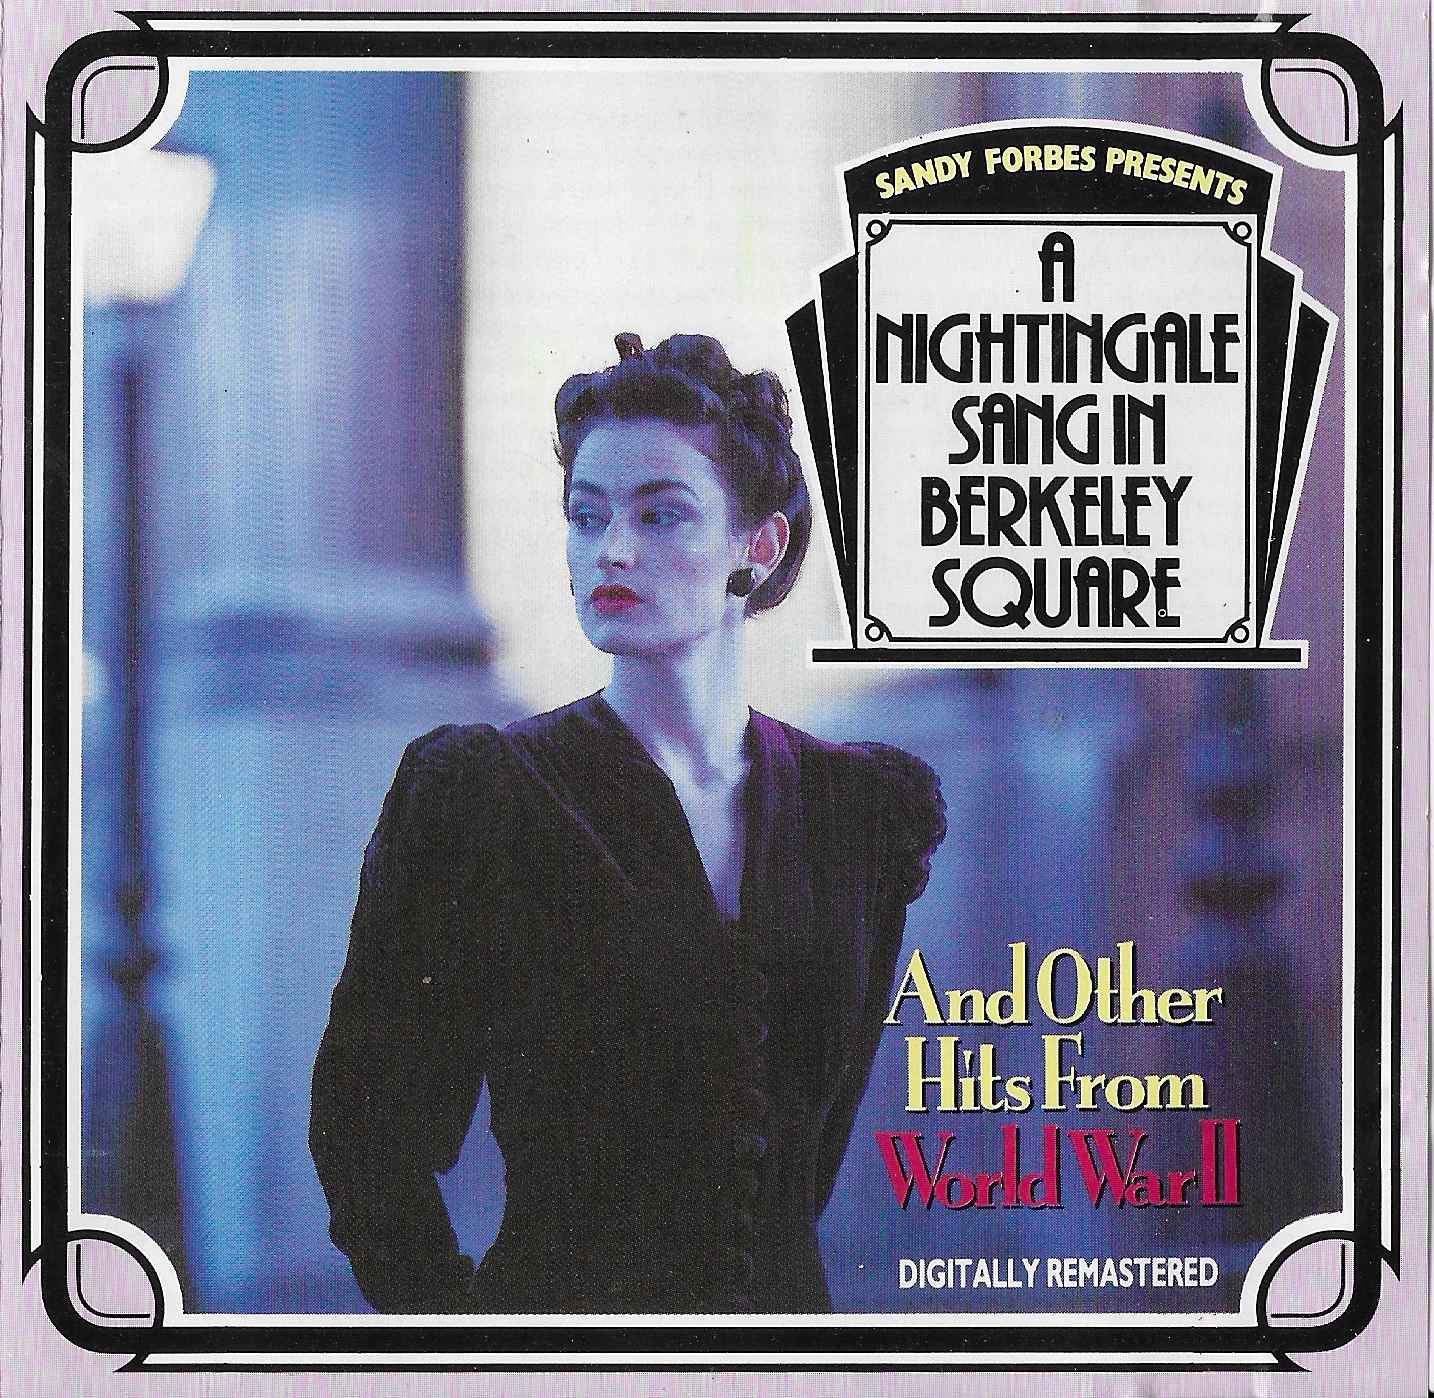 Picture of Nightingale sang Berkeley Square and other hits from World War II by artist Vile Bodies from the BBC cds - Records and Tapes library